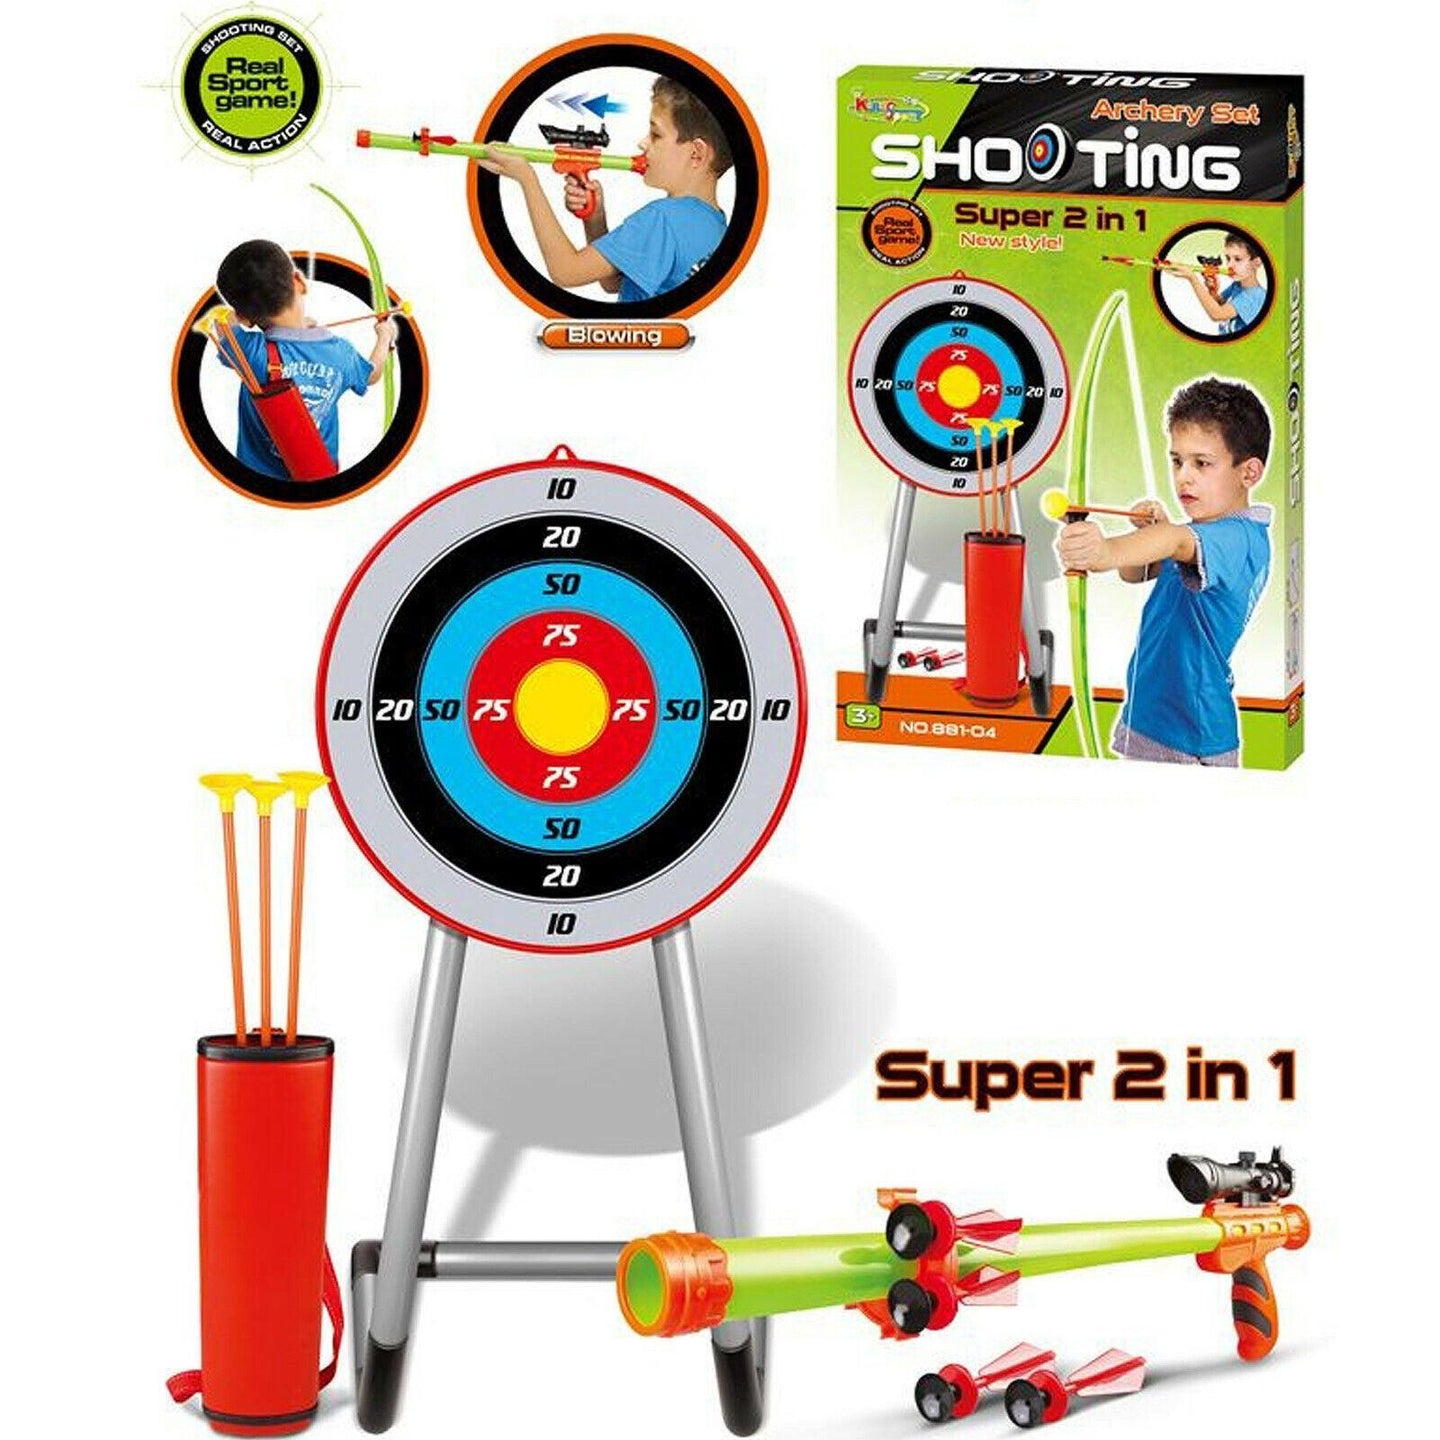 Buy New Kingsport Large 2 in 1 Archery Set Kids Suction Arrows Target 90cm Stand discounted | Products On Sale Australia